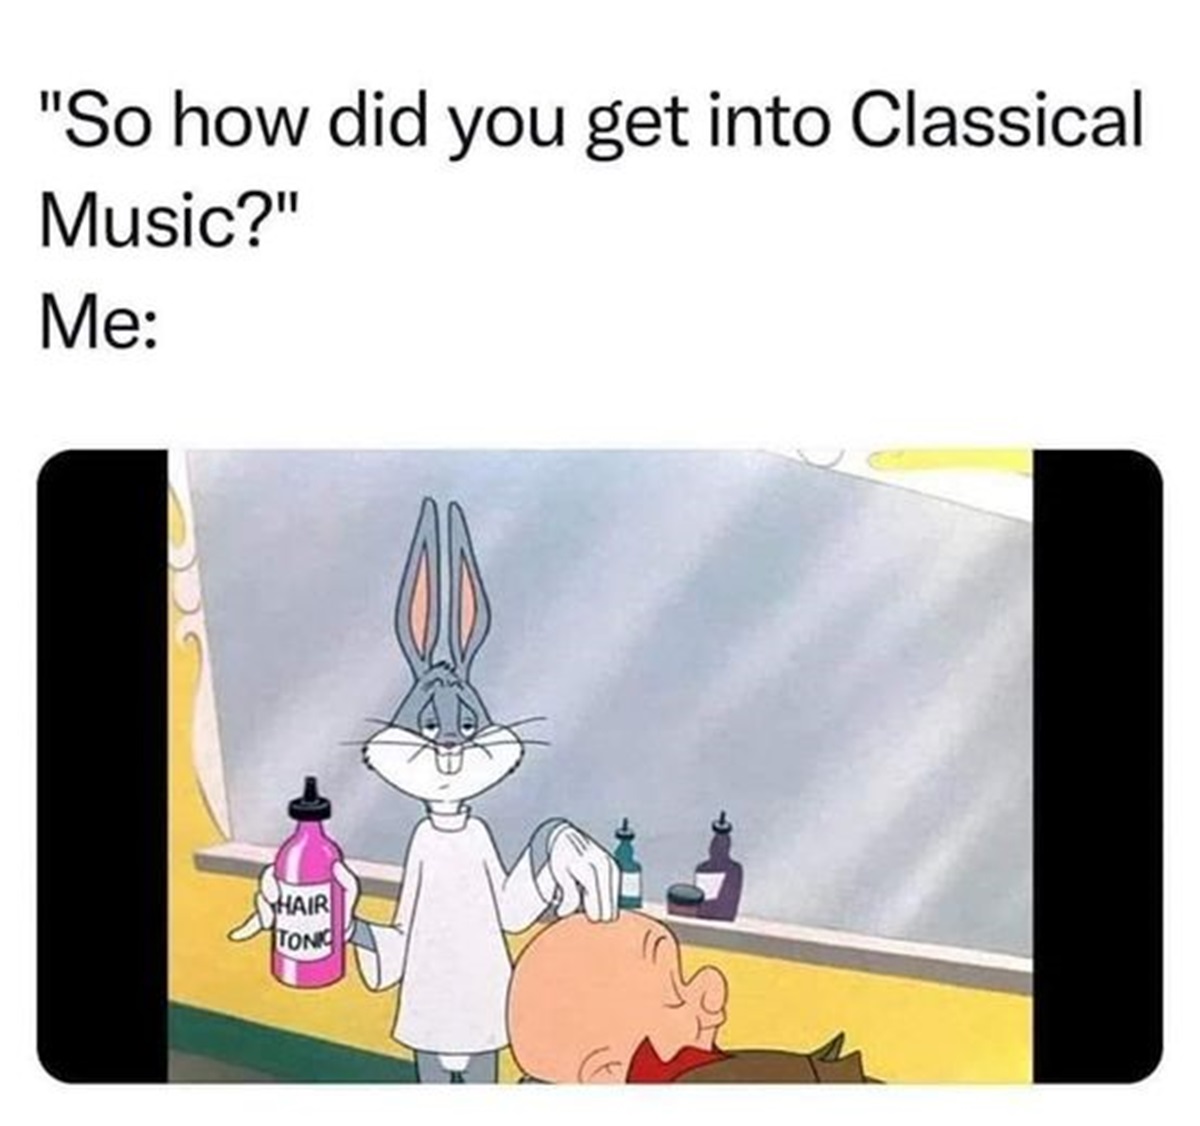 classical music memes - "So how did you get into Classical Music?" Me Hair Tonic